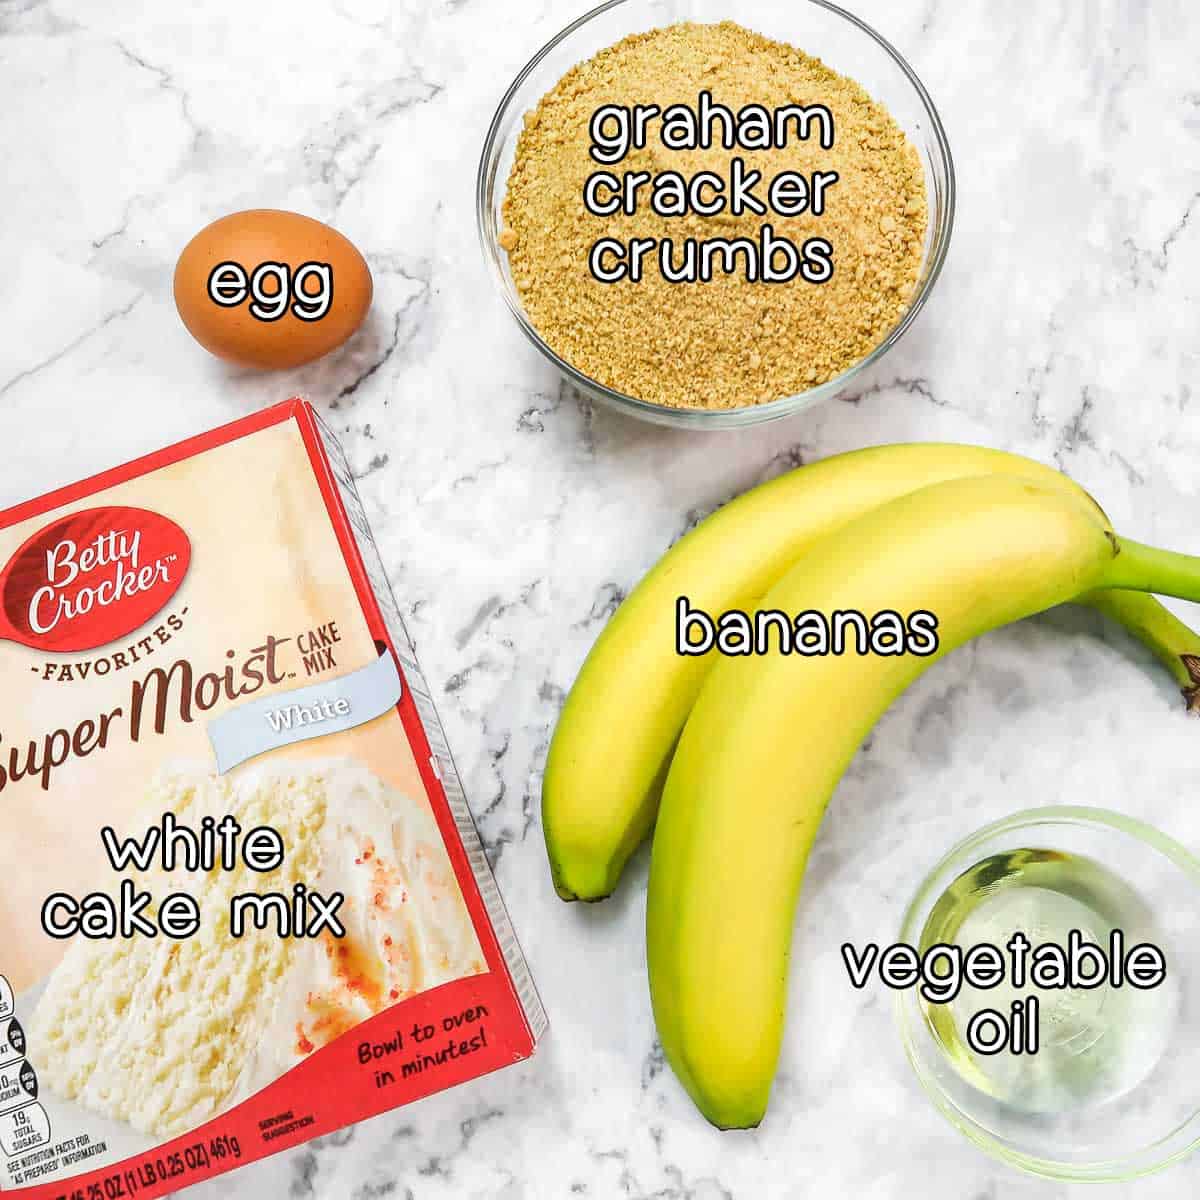 Overhead shot of ingredients - graham cracker crumbs, egg, white cake mix, bananas, and vegetable oil.